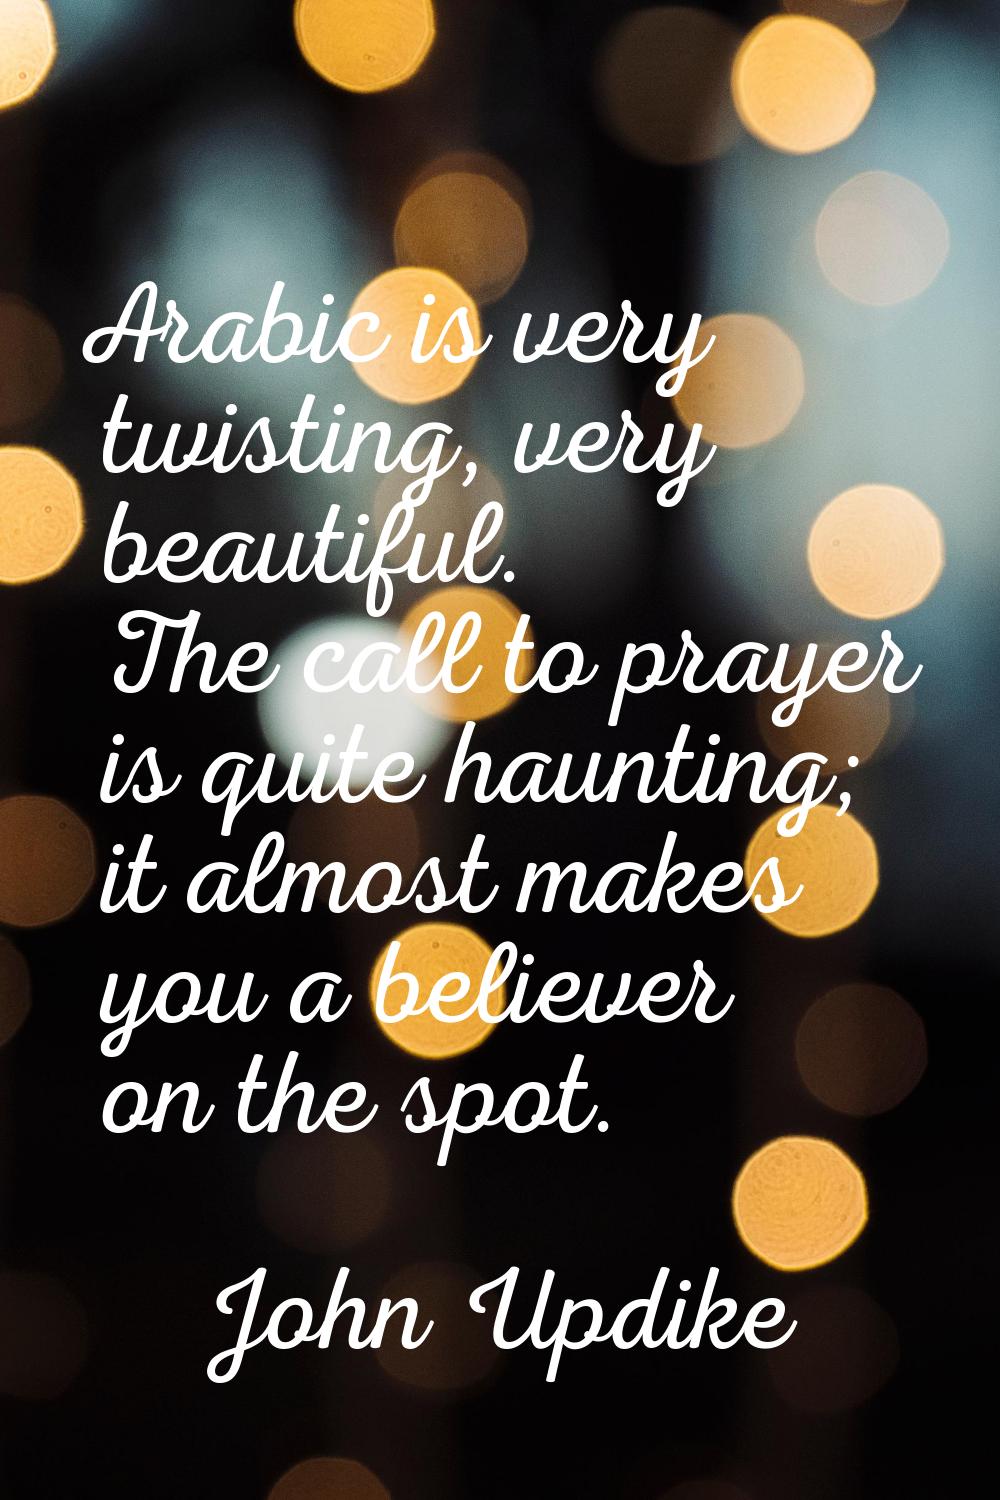 Arabic is very twisting, very beautiful. The call to prayer is quite haunting; it almost makes you 